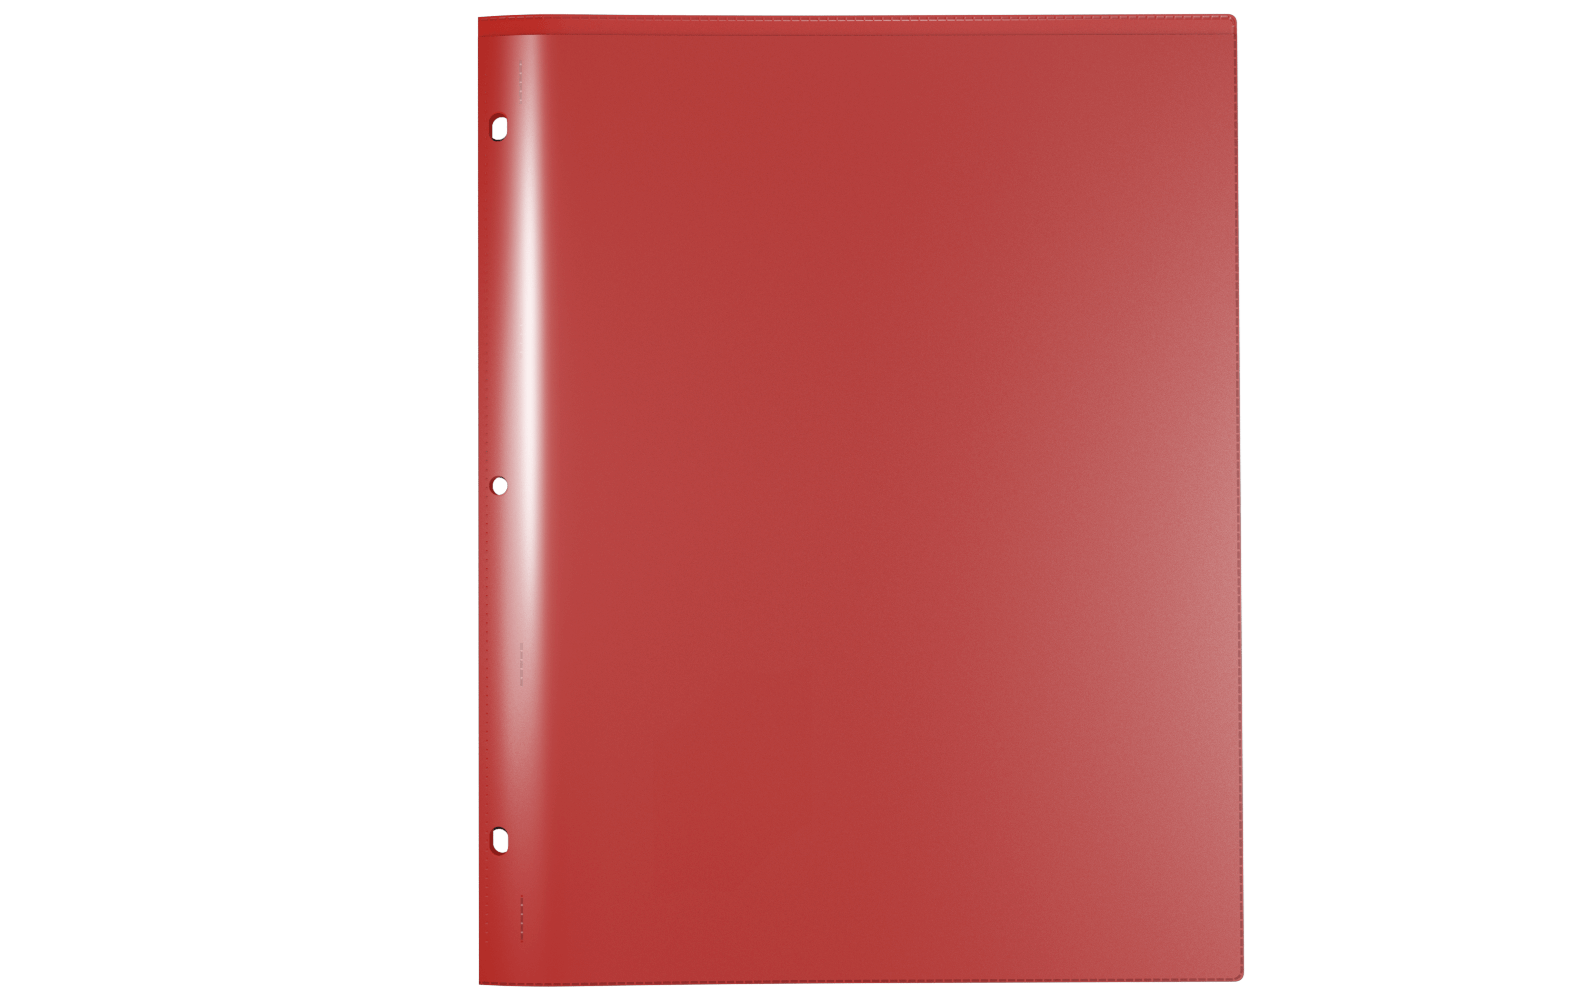 Front view of Nicky's 4 Multi Pocket Sleeves Folder used for presentation.